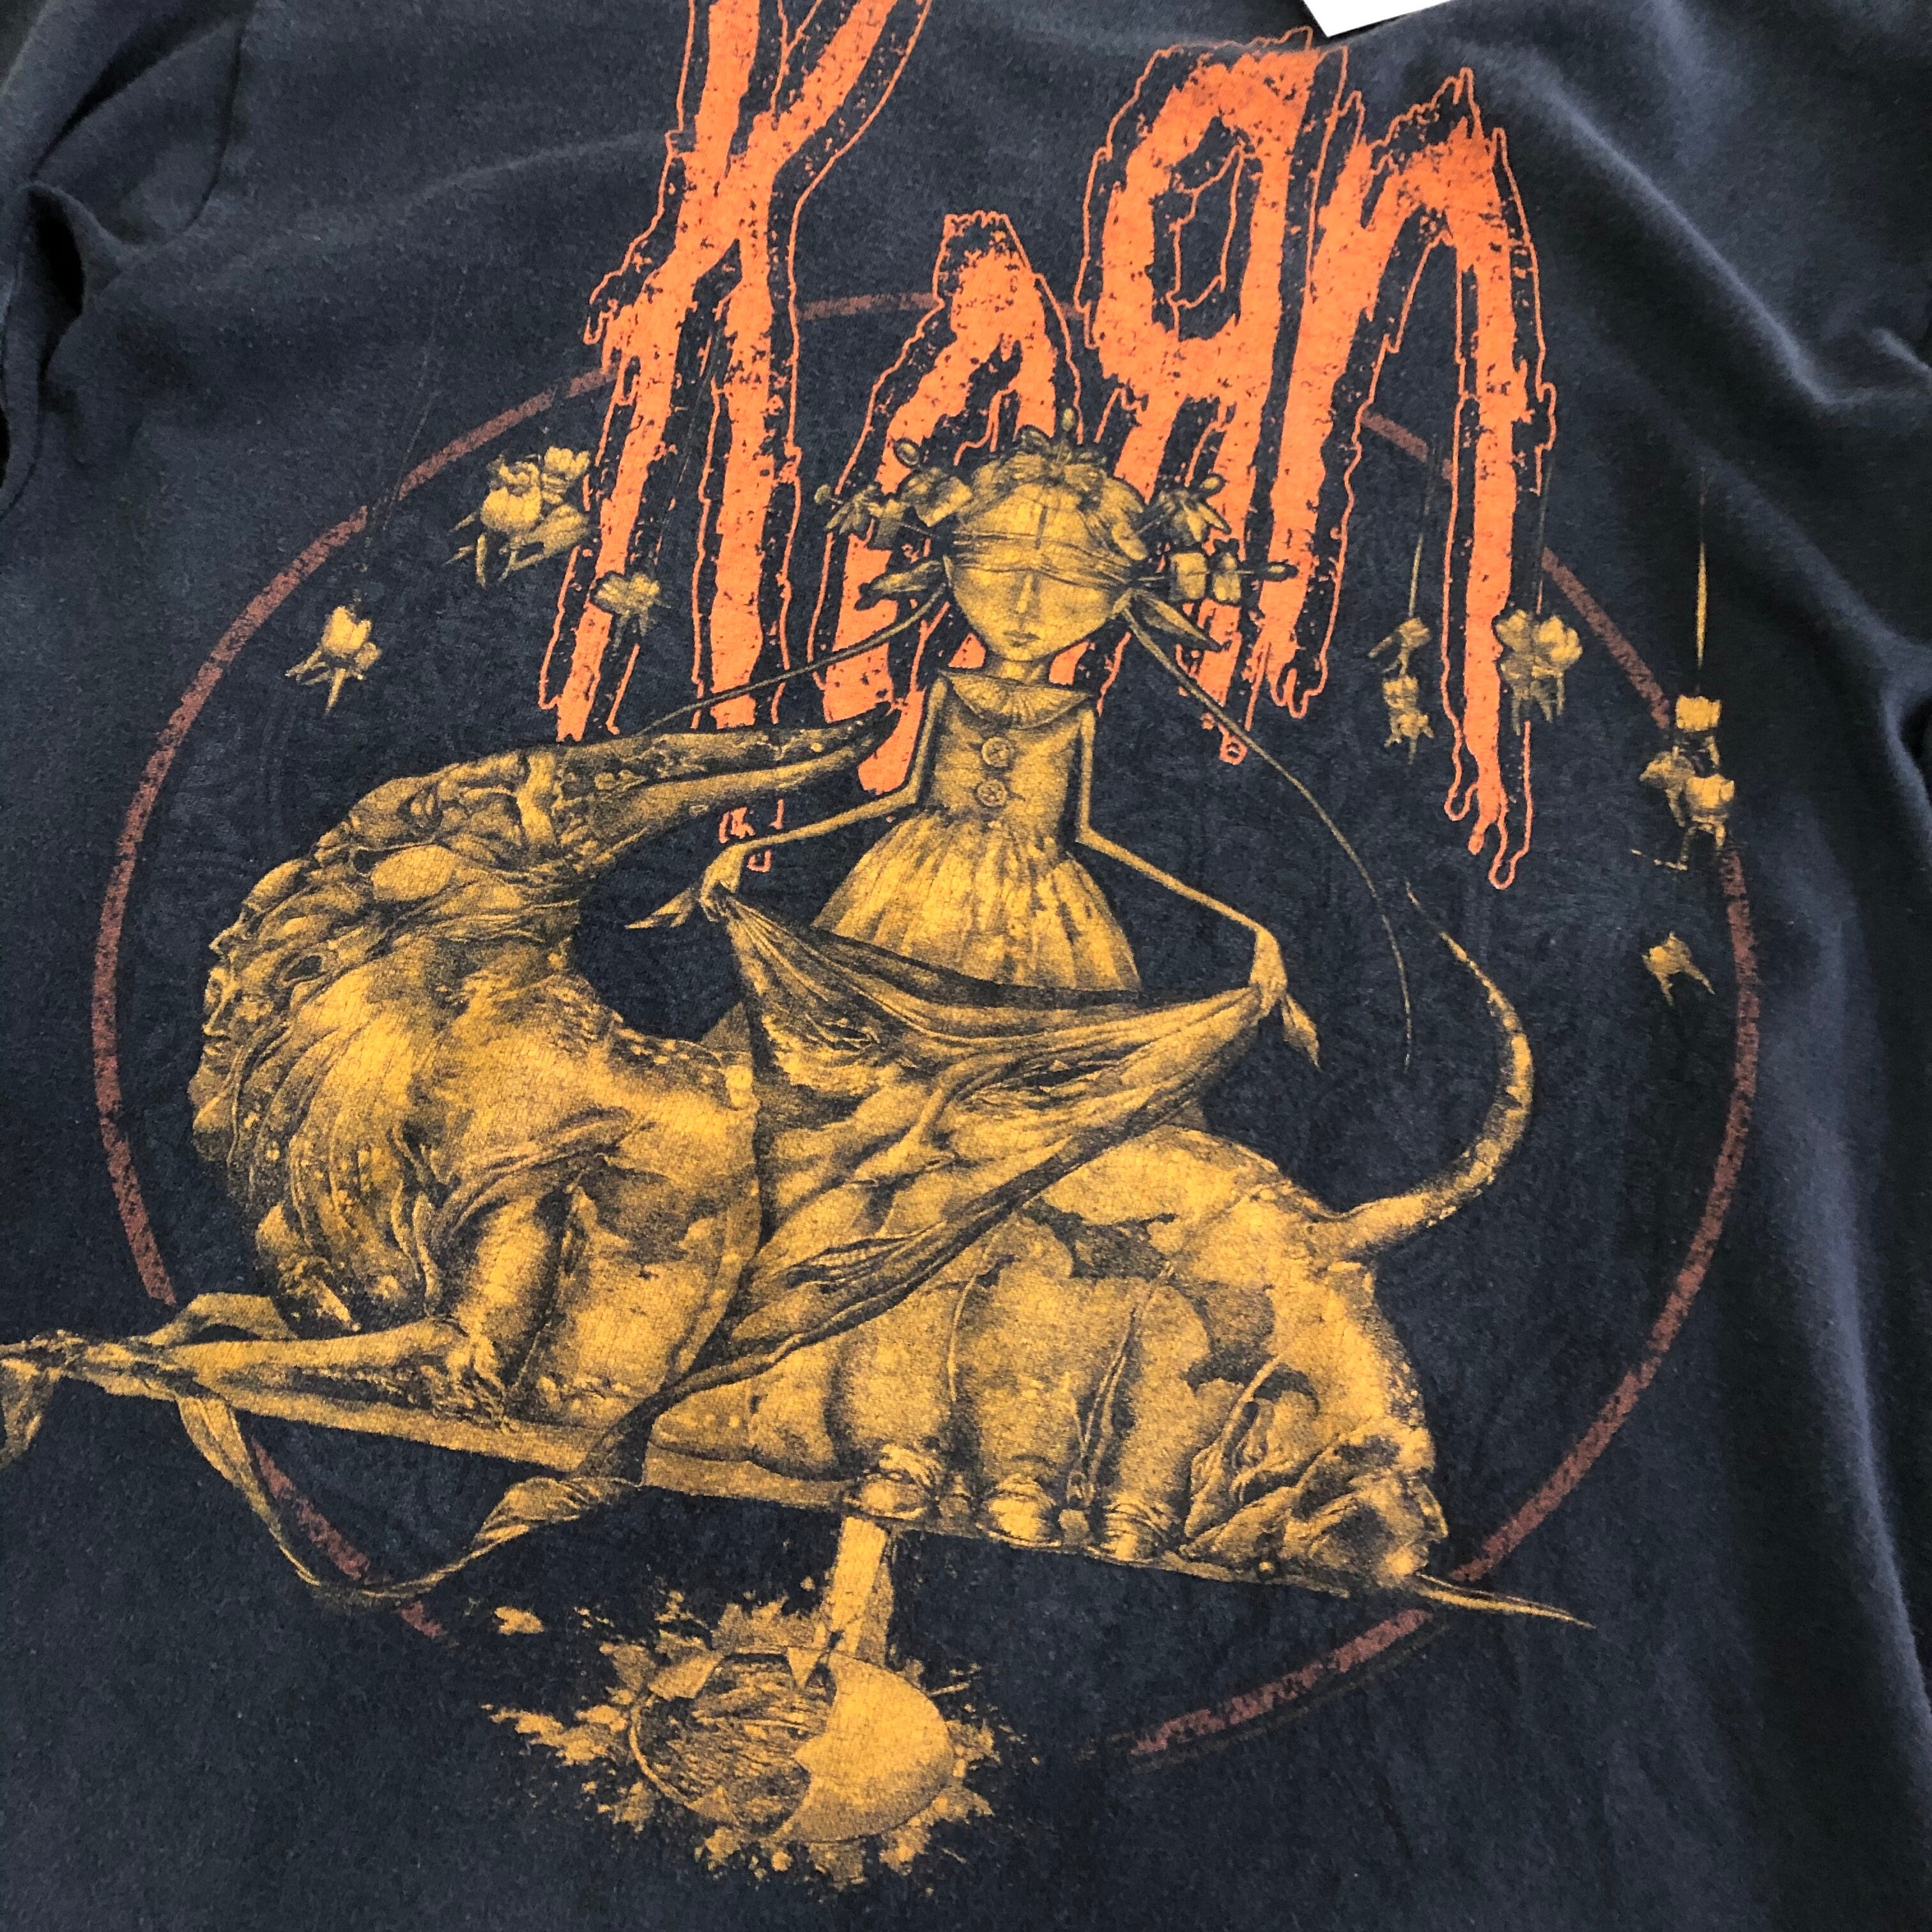 00s Korn T-shirt | What’z up powered by BASE